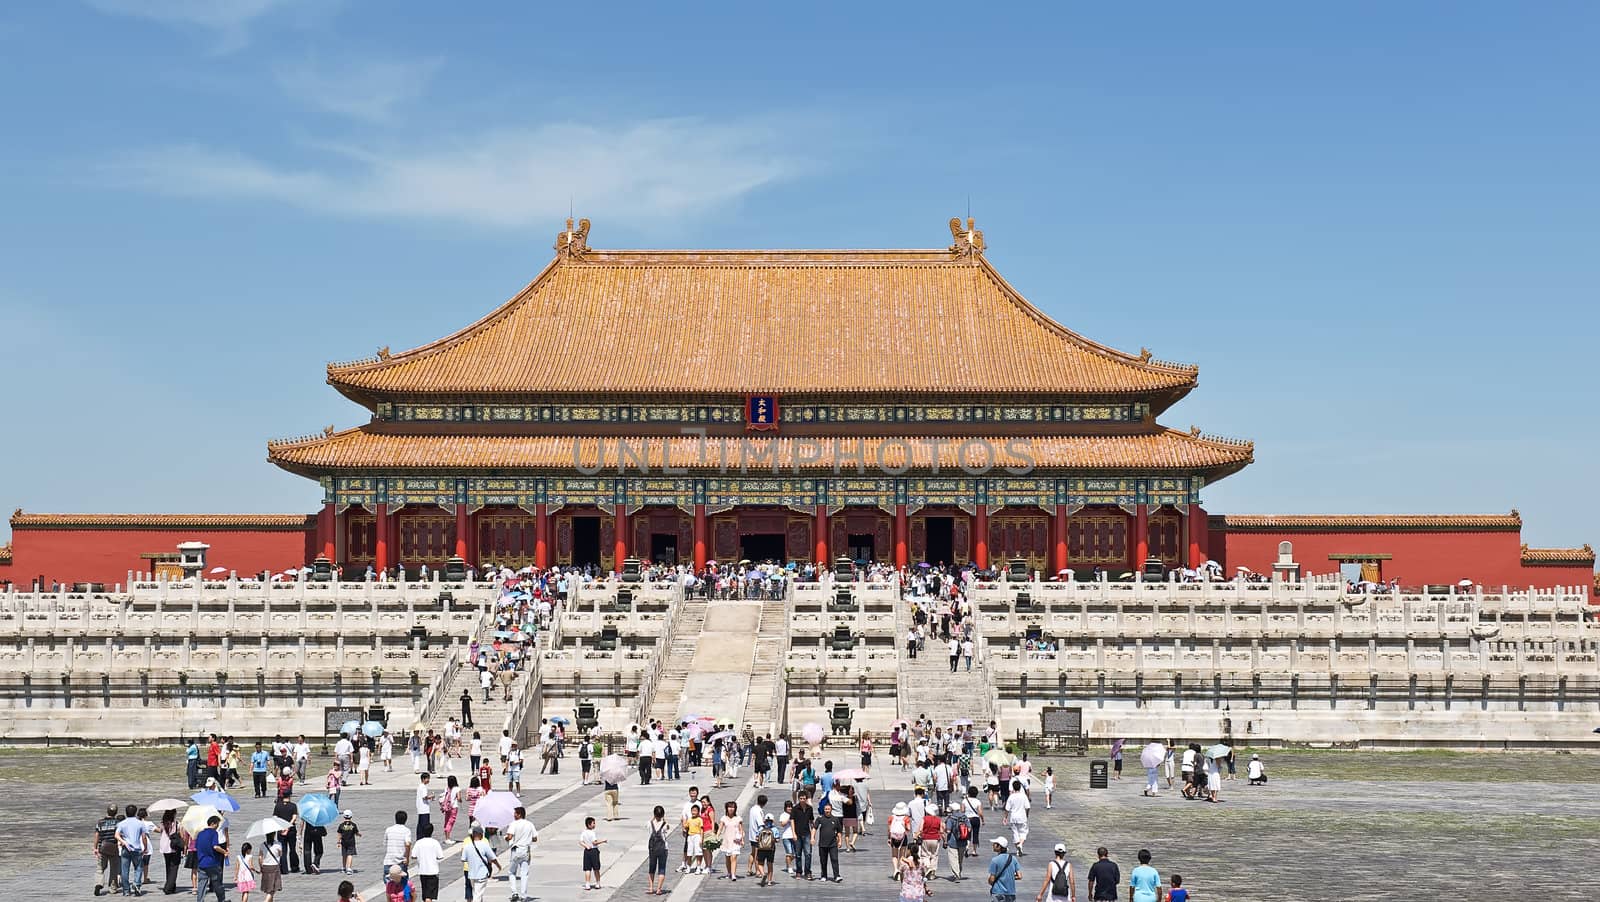 Forbidden city temple by Marcus